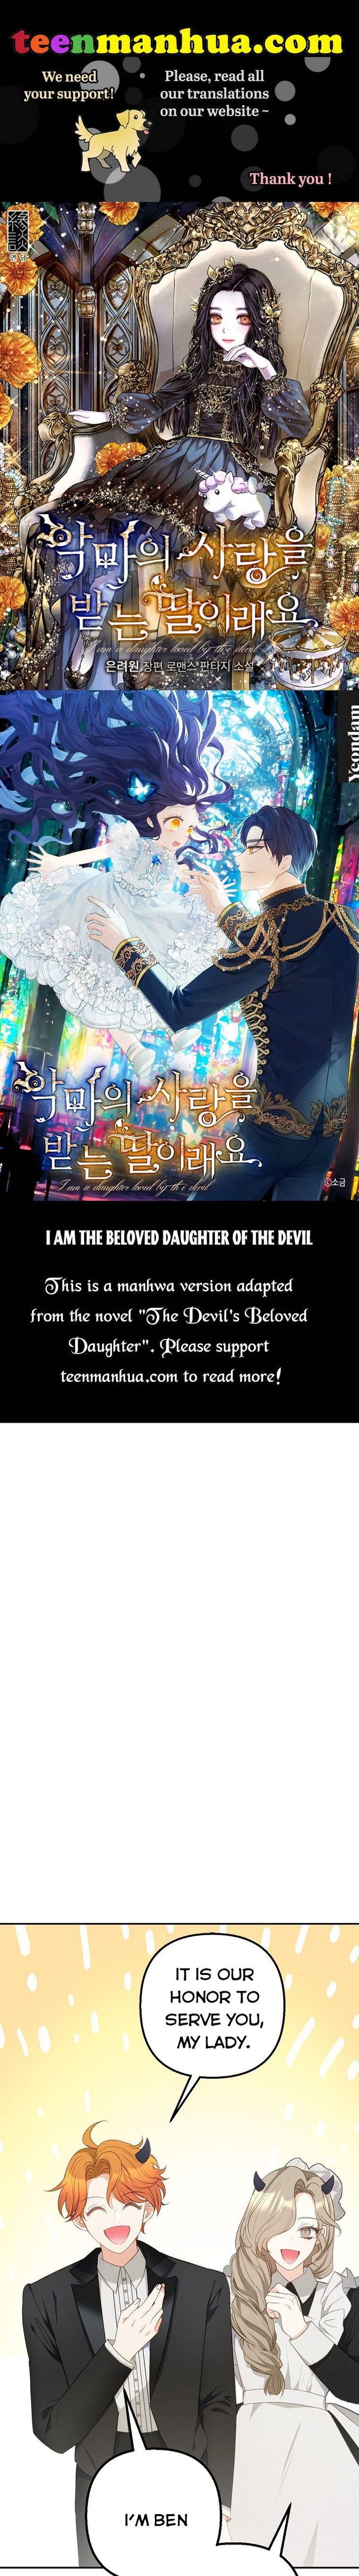 I Am A Daughter Loved By The Devil - Page 1